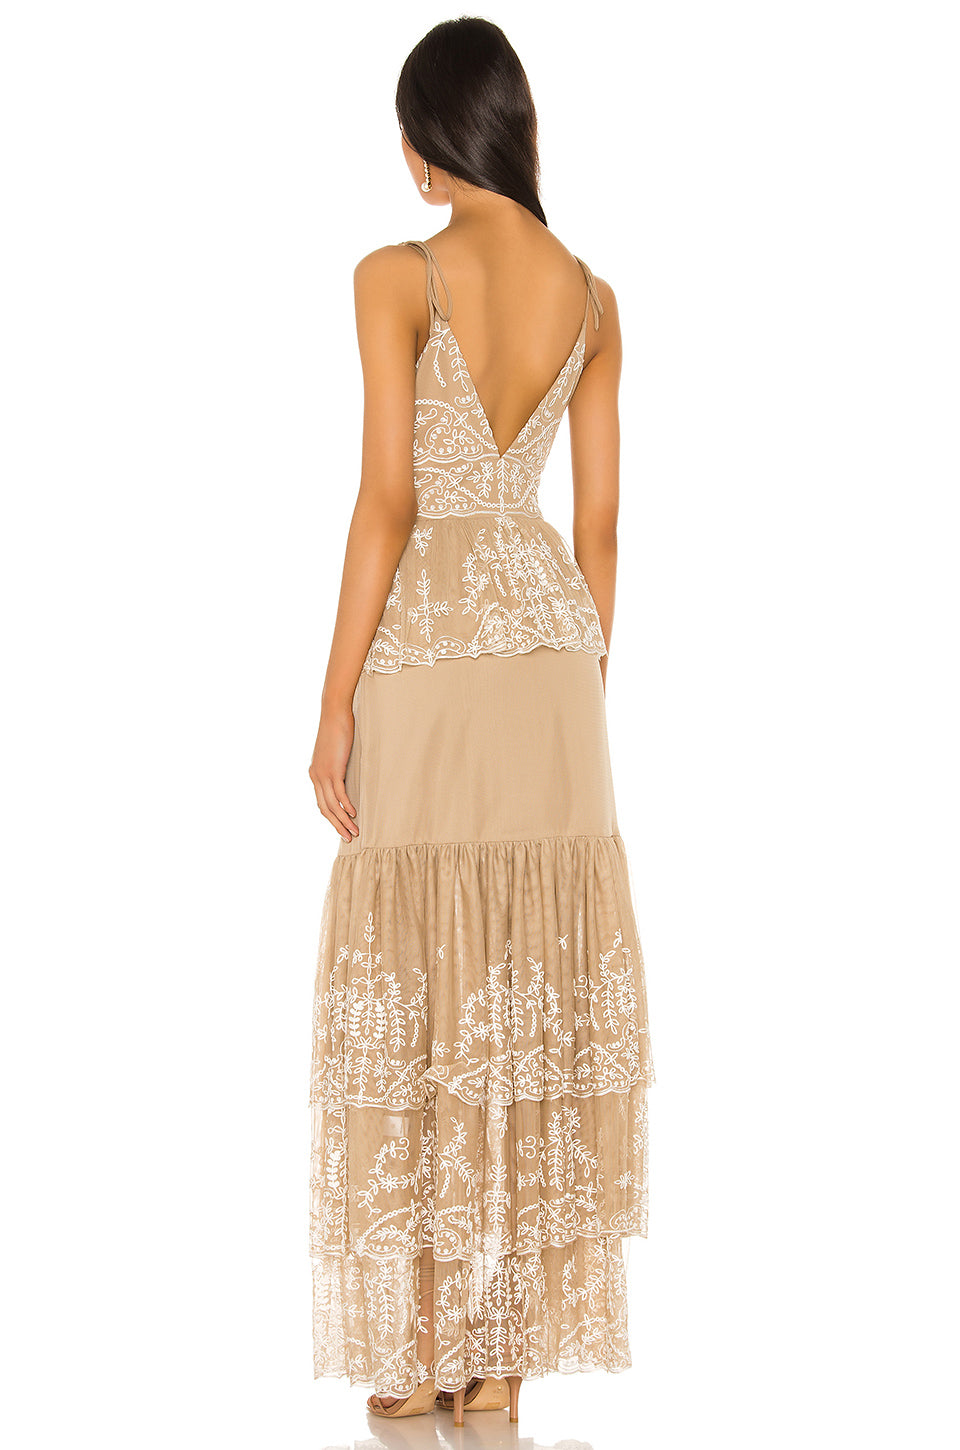 Geonna Dress in NUDE & WHITE